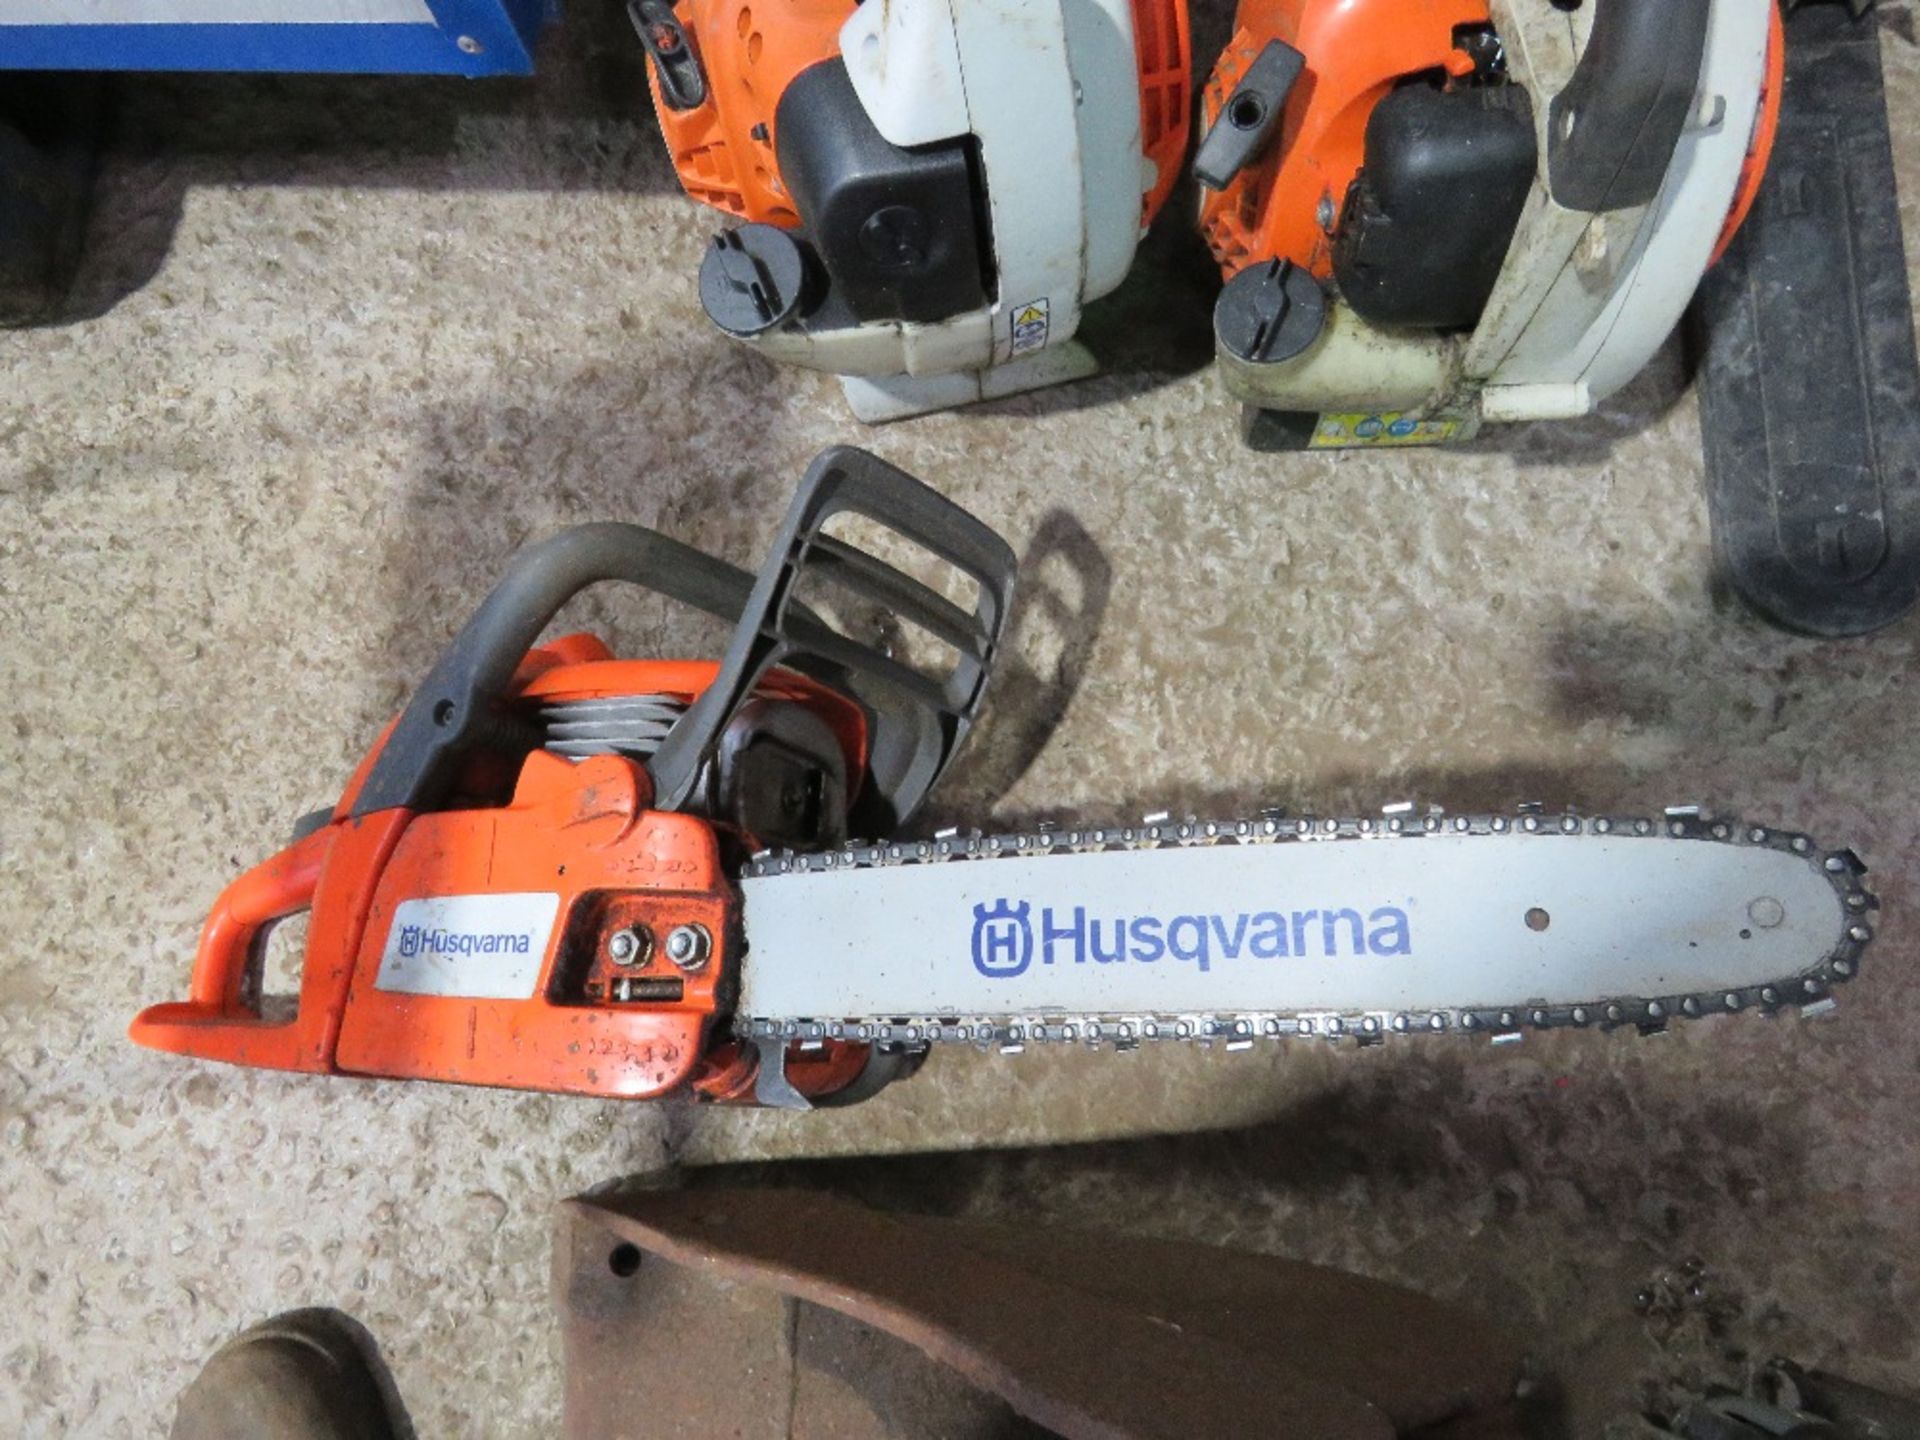 HUSQVARNA 240 PETROL CHAINSAW. THIS LOT IS SOLD UNDER THE AUCTIONEERS MARGIN SCHEME, THEREFORE NO - Image 3 of 4